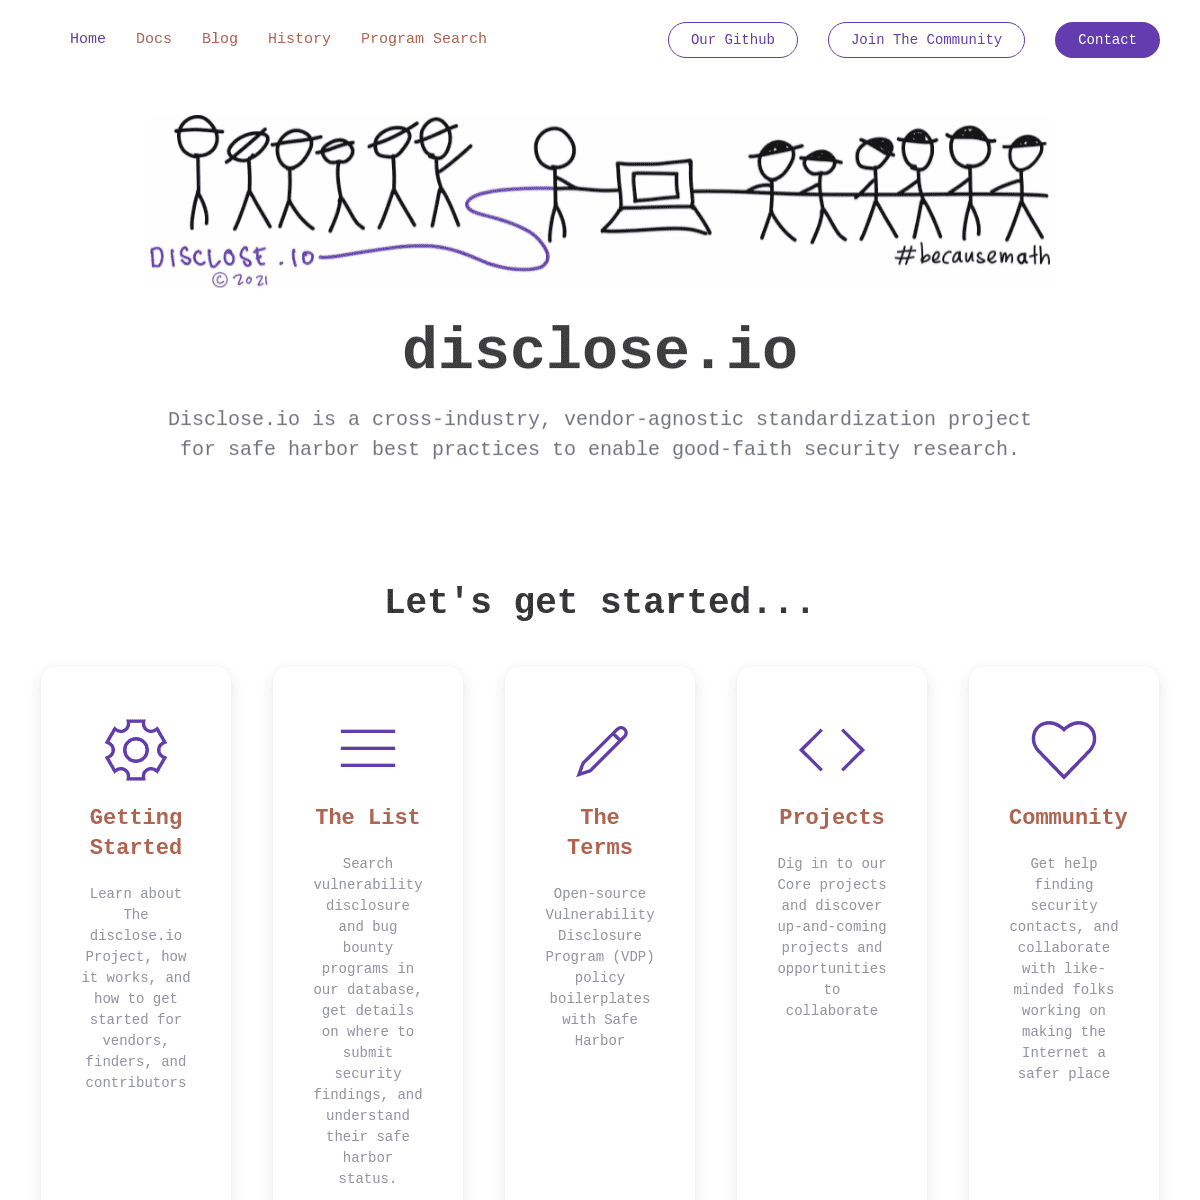 A complete backup of https://disclose.io